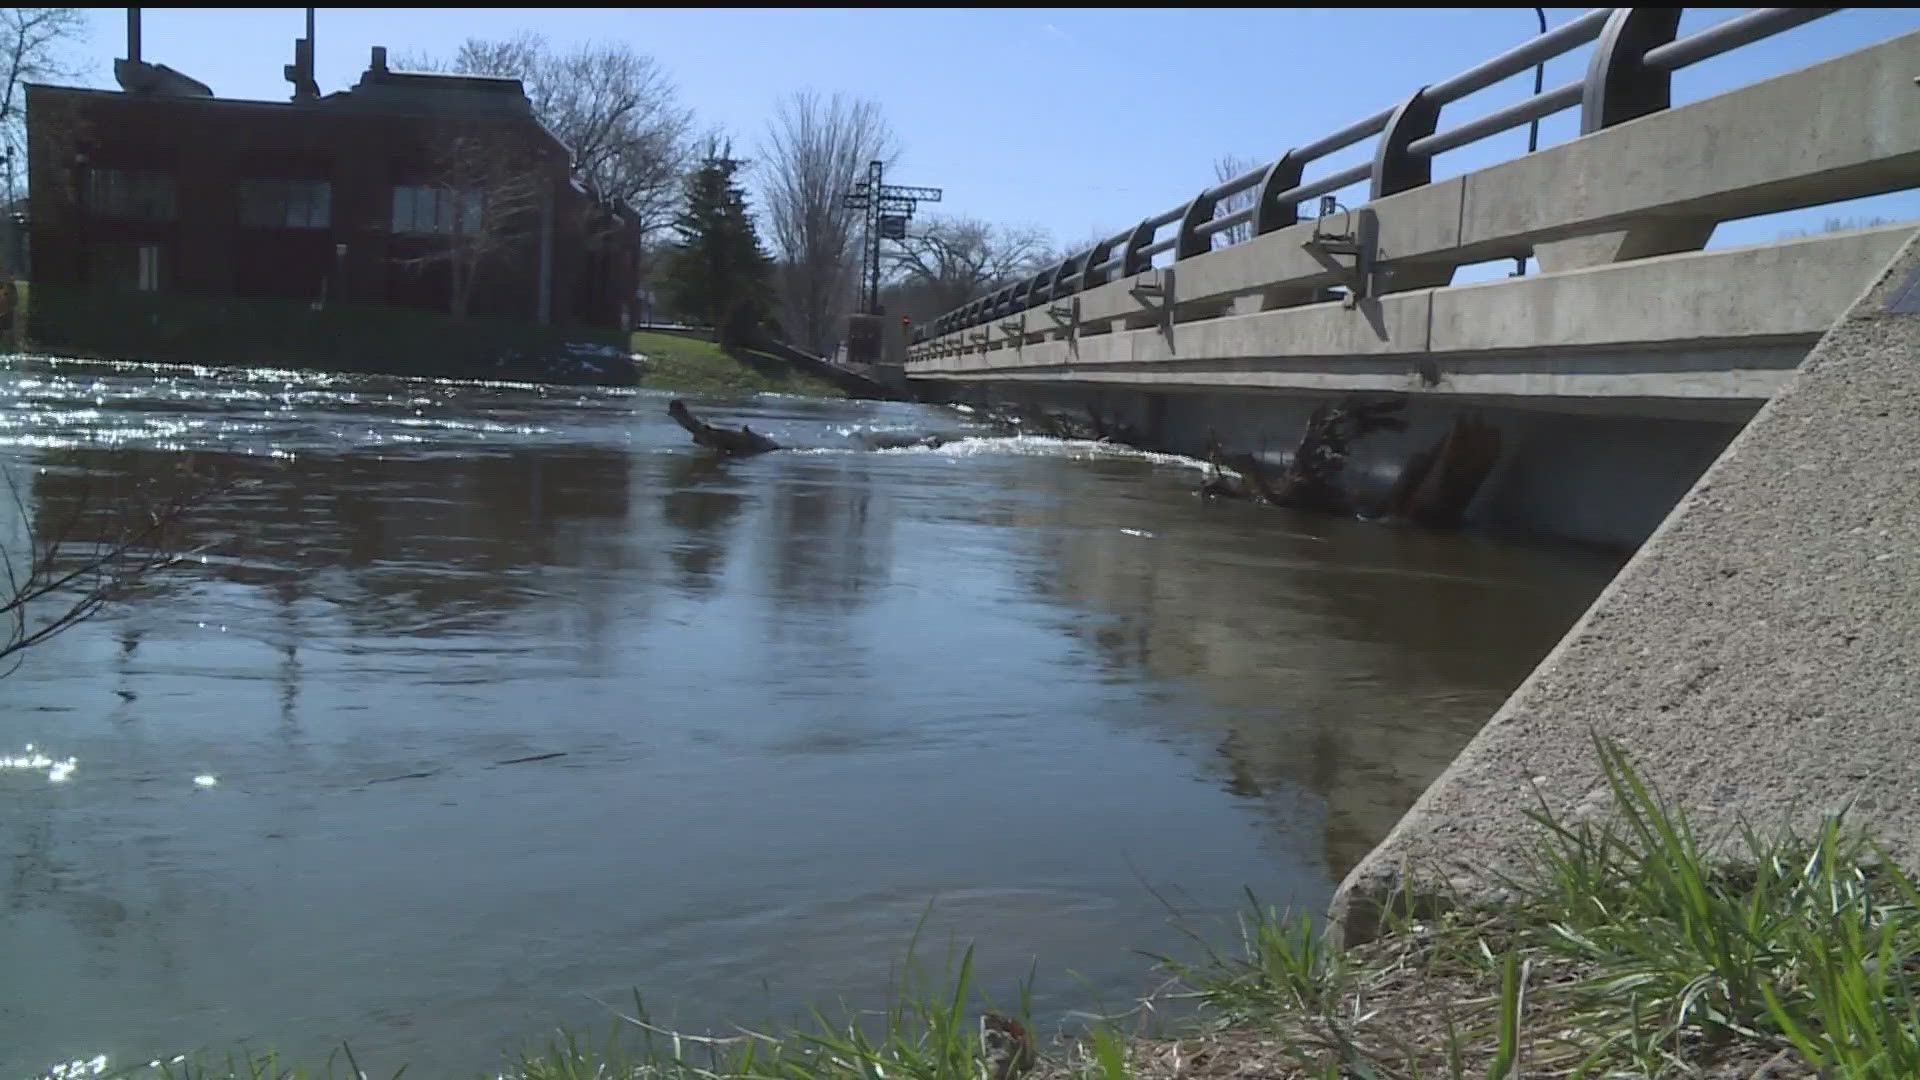 City Administrator Phil Kern said officials are keeping a close eye on the Crow River's levels and hoping there won't be more rain later in the week.